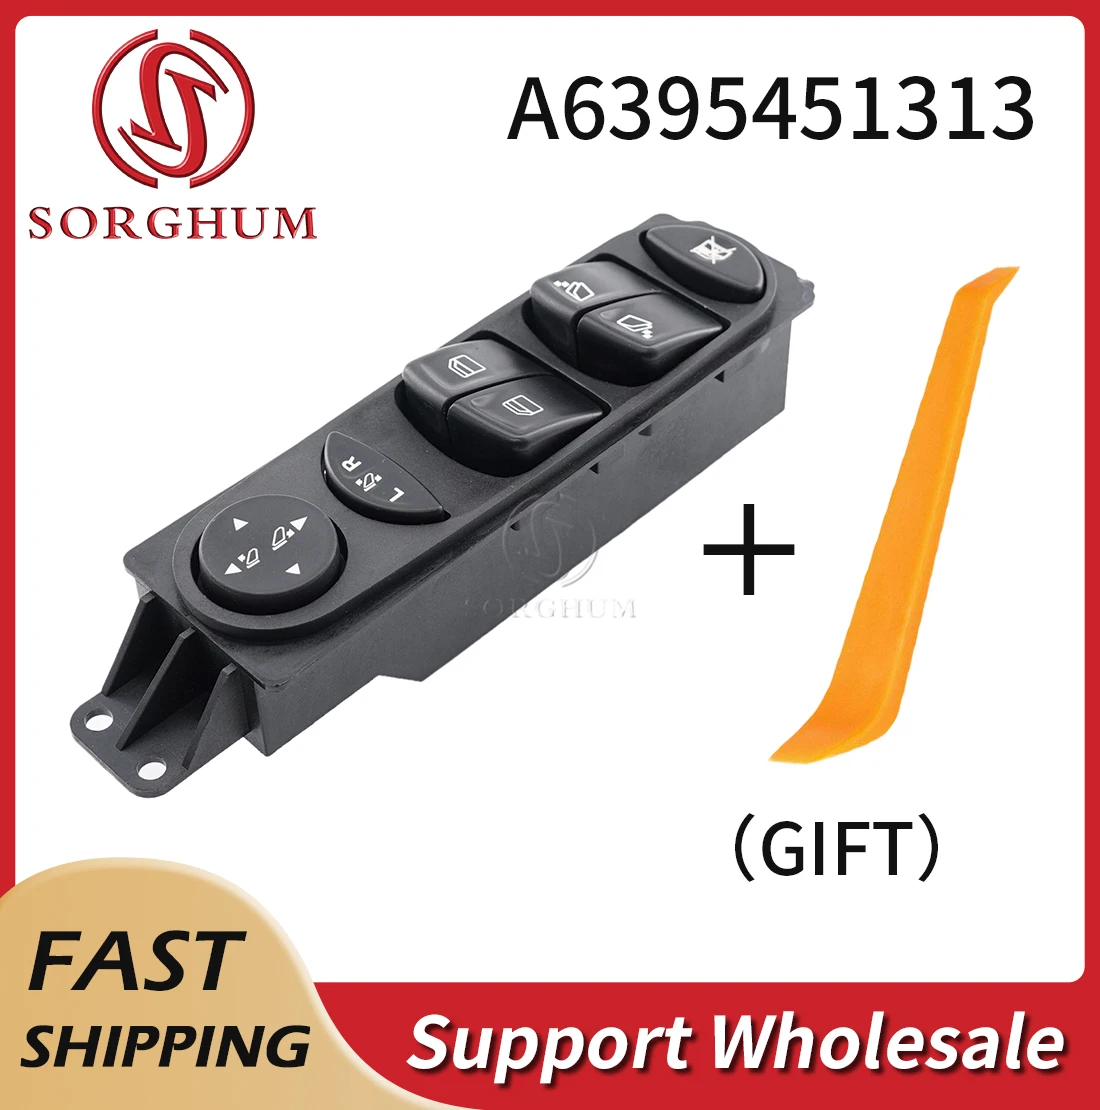 

Sorghum A6395451313 LHD Front Left Window Switch Master Control Button For Mercedes-Benz Viano Wieland W639 2006-2012 6395451313